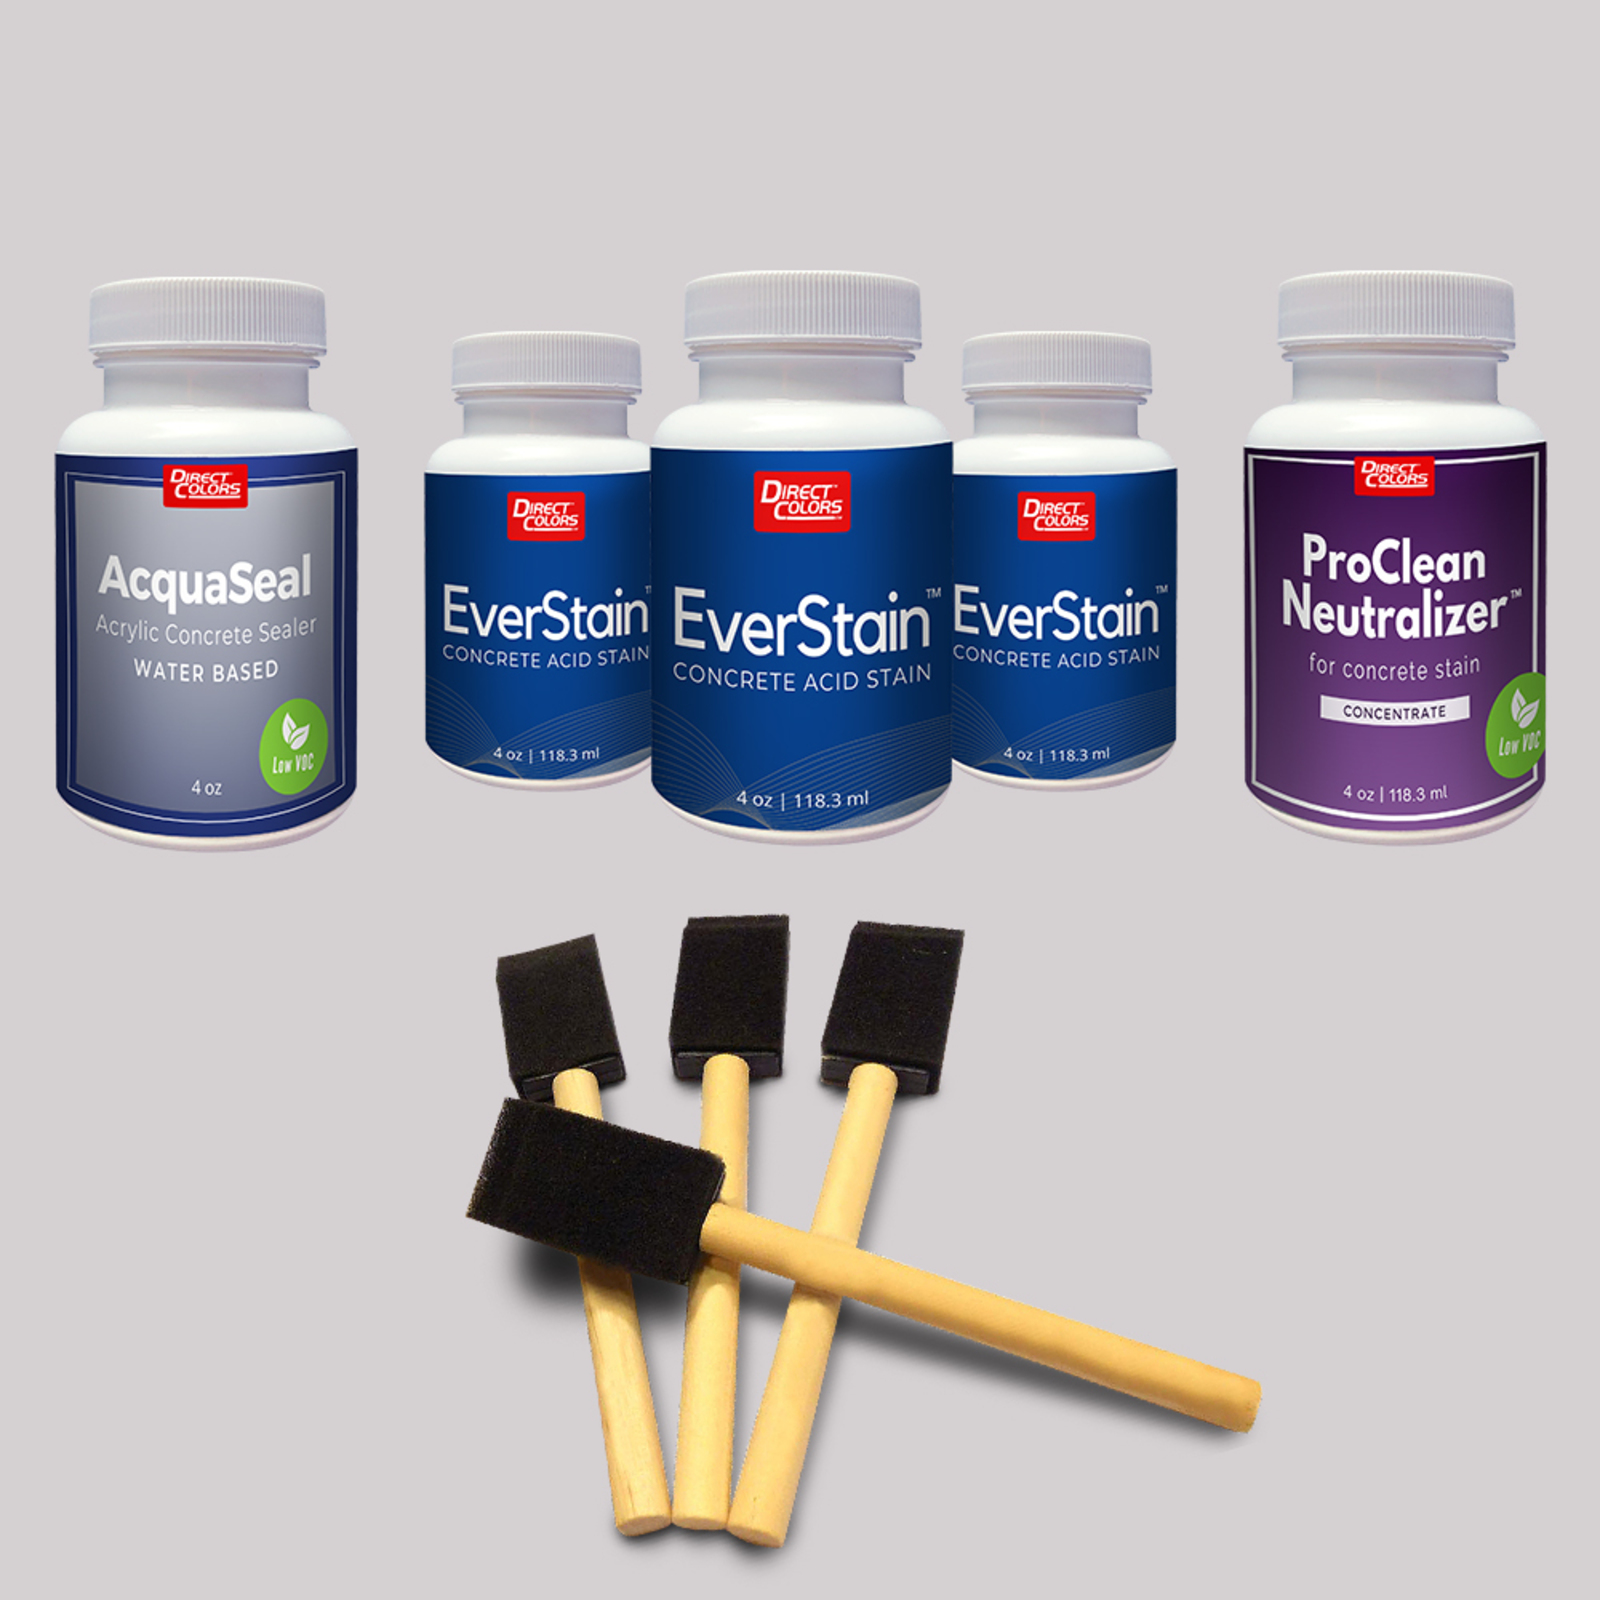 Water-Based Paint: Navy Blue (20 ml)